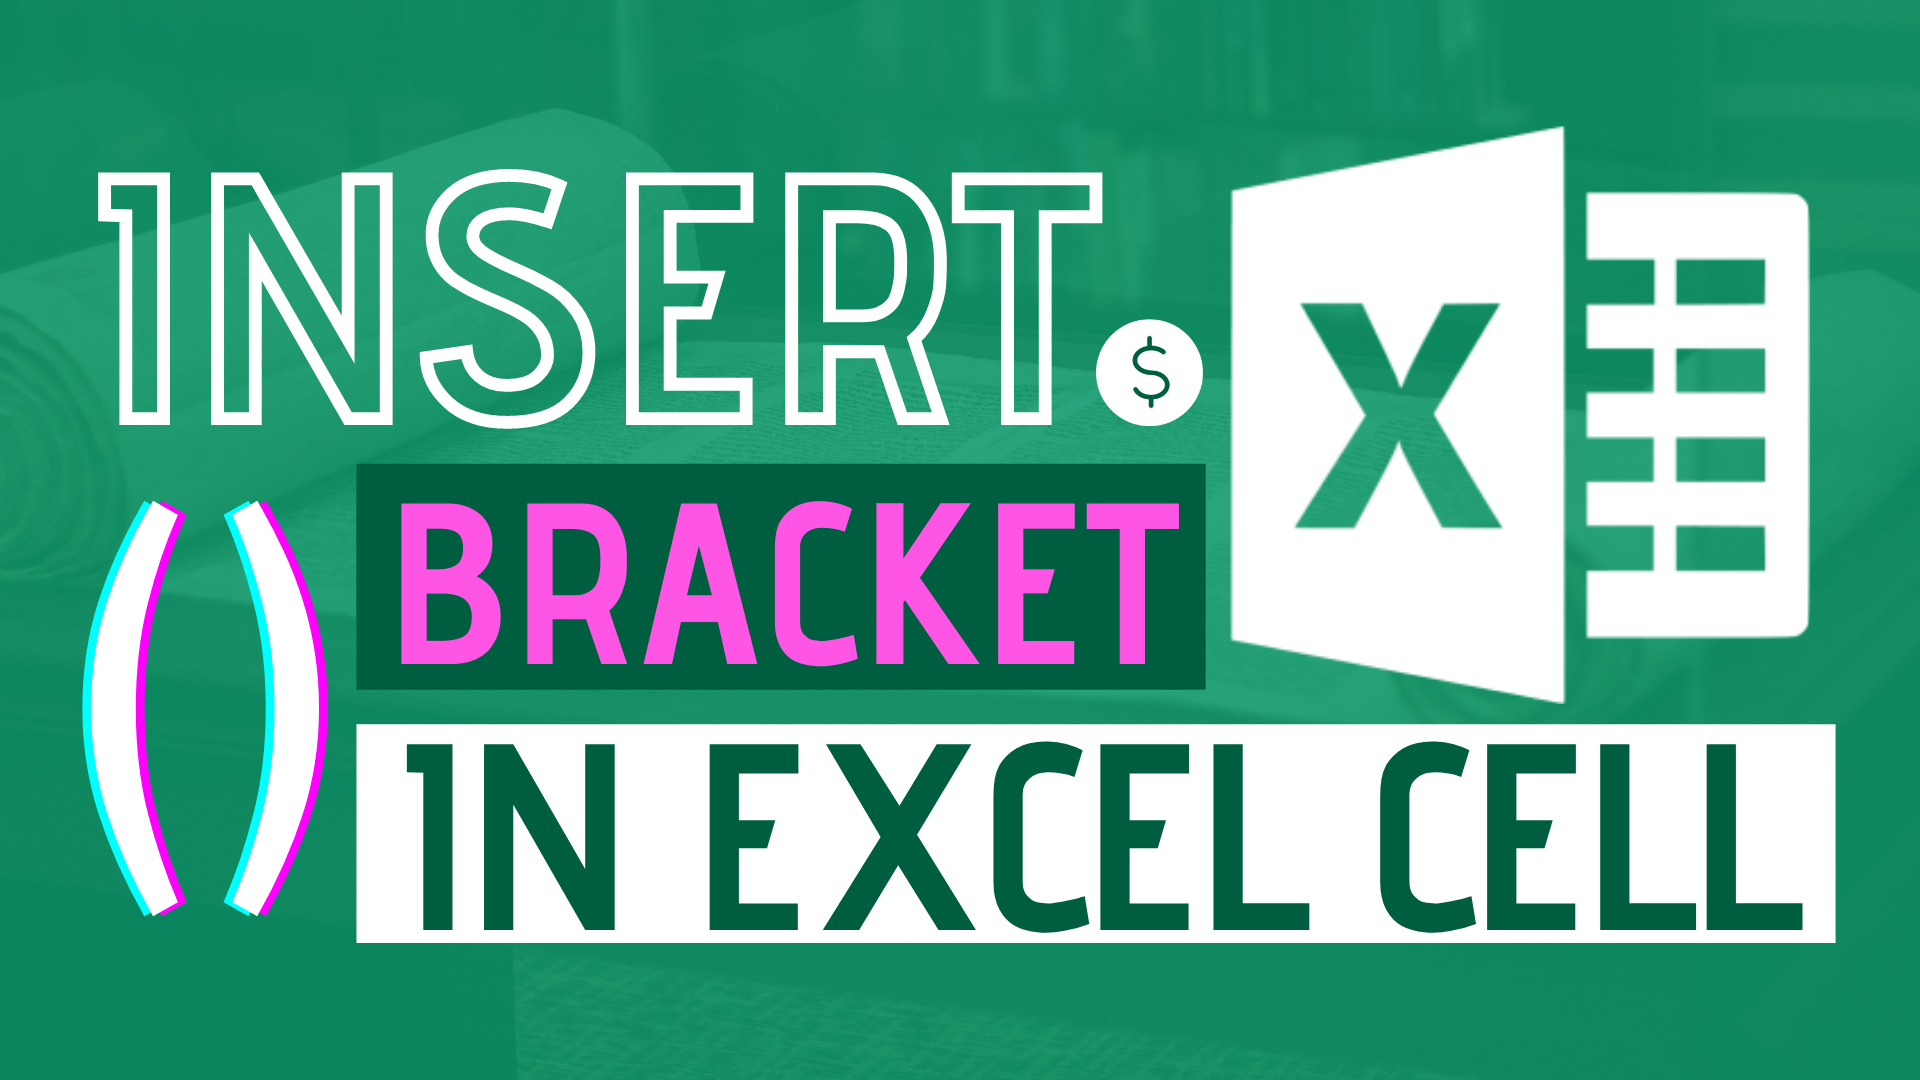 curly brackets in excel